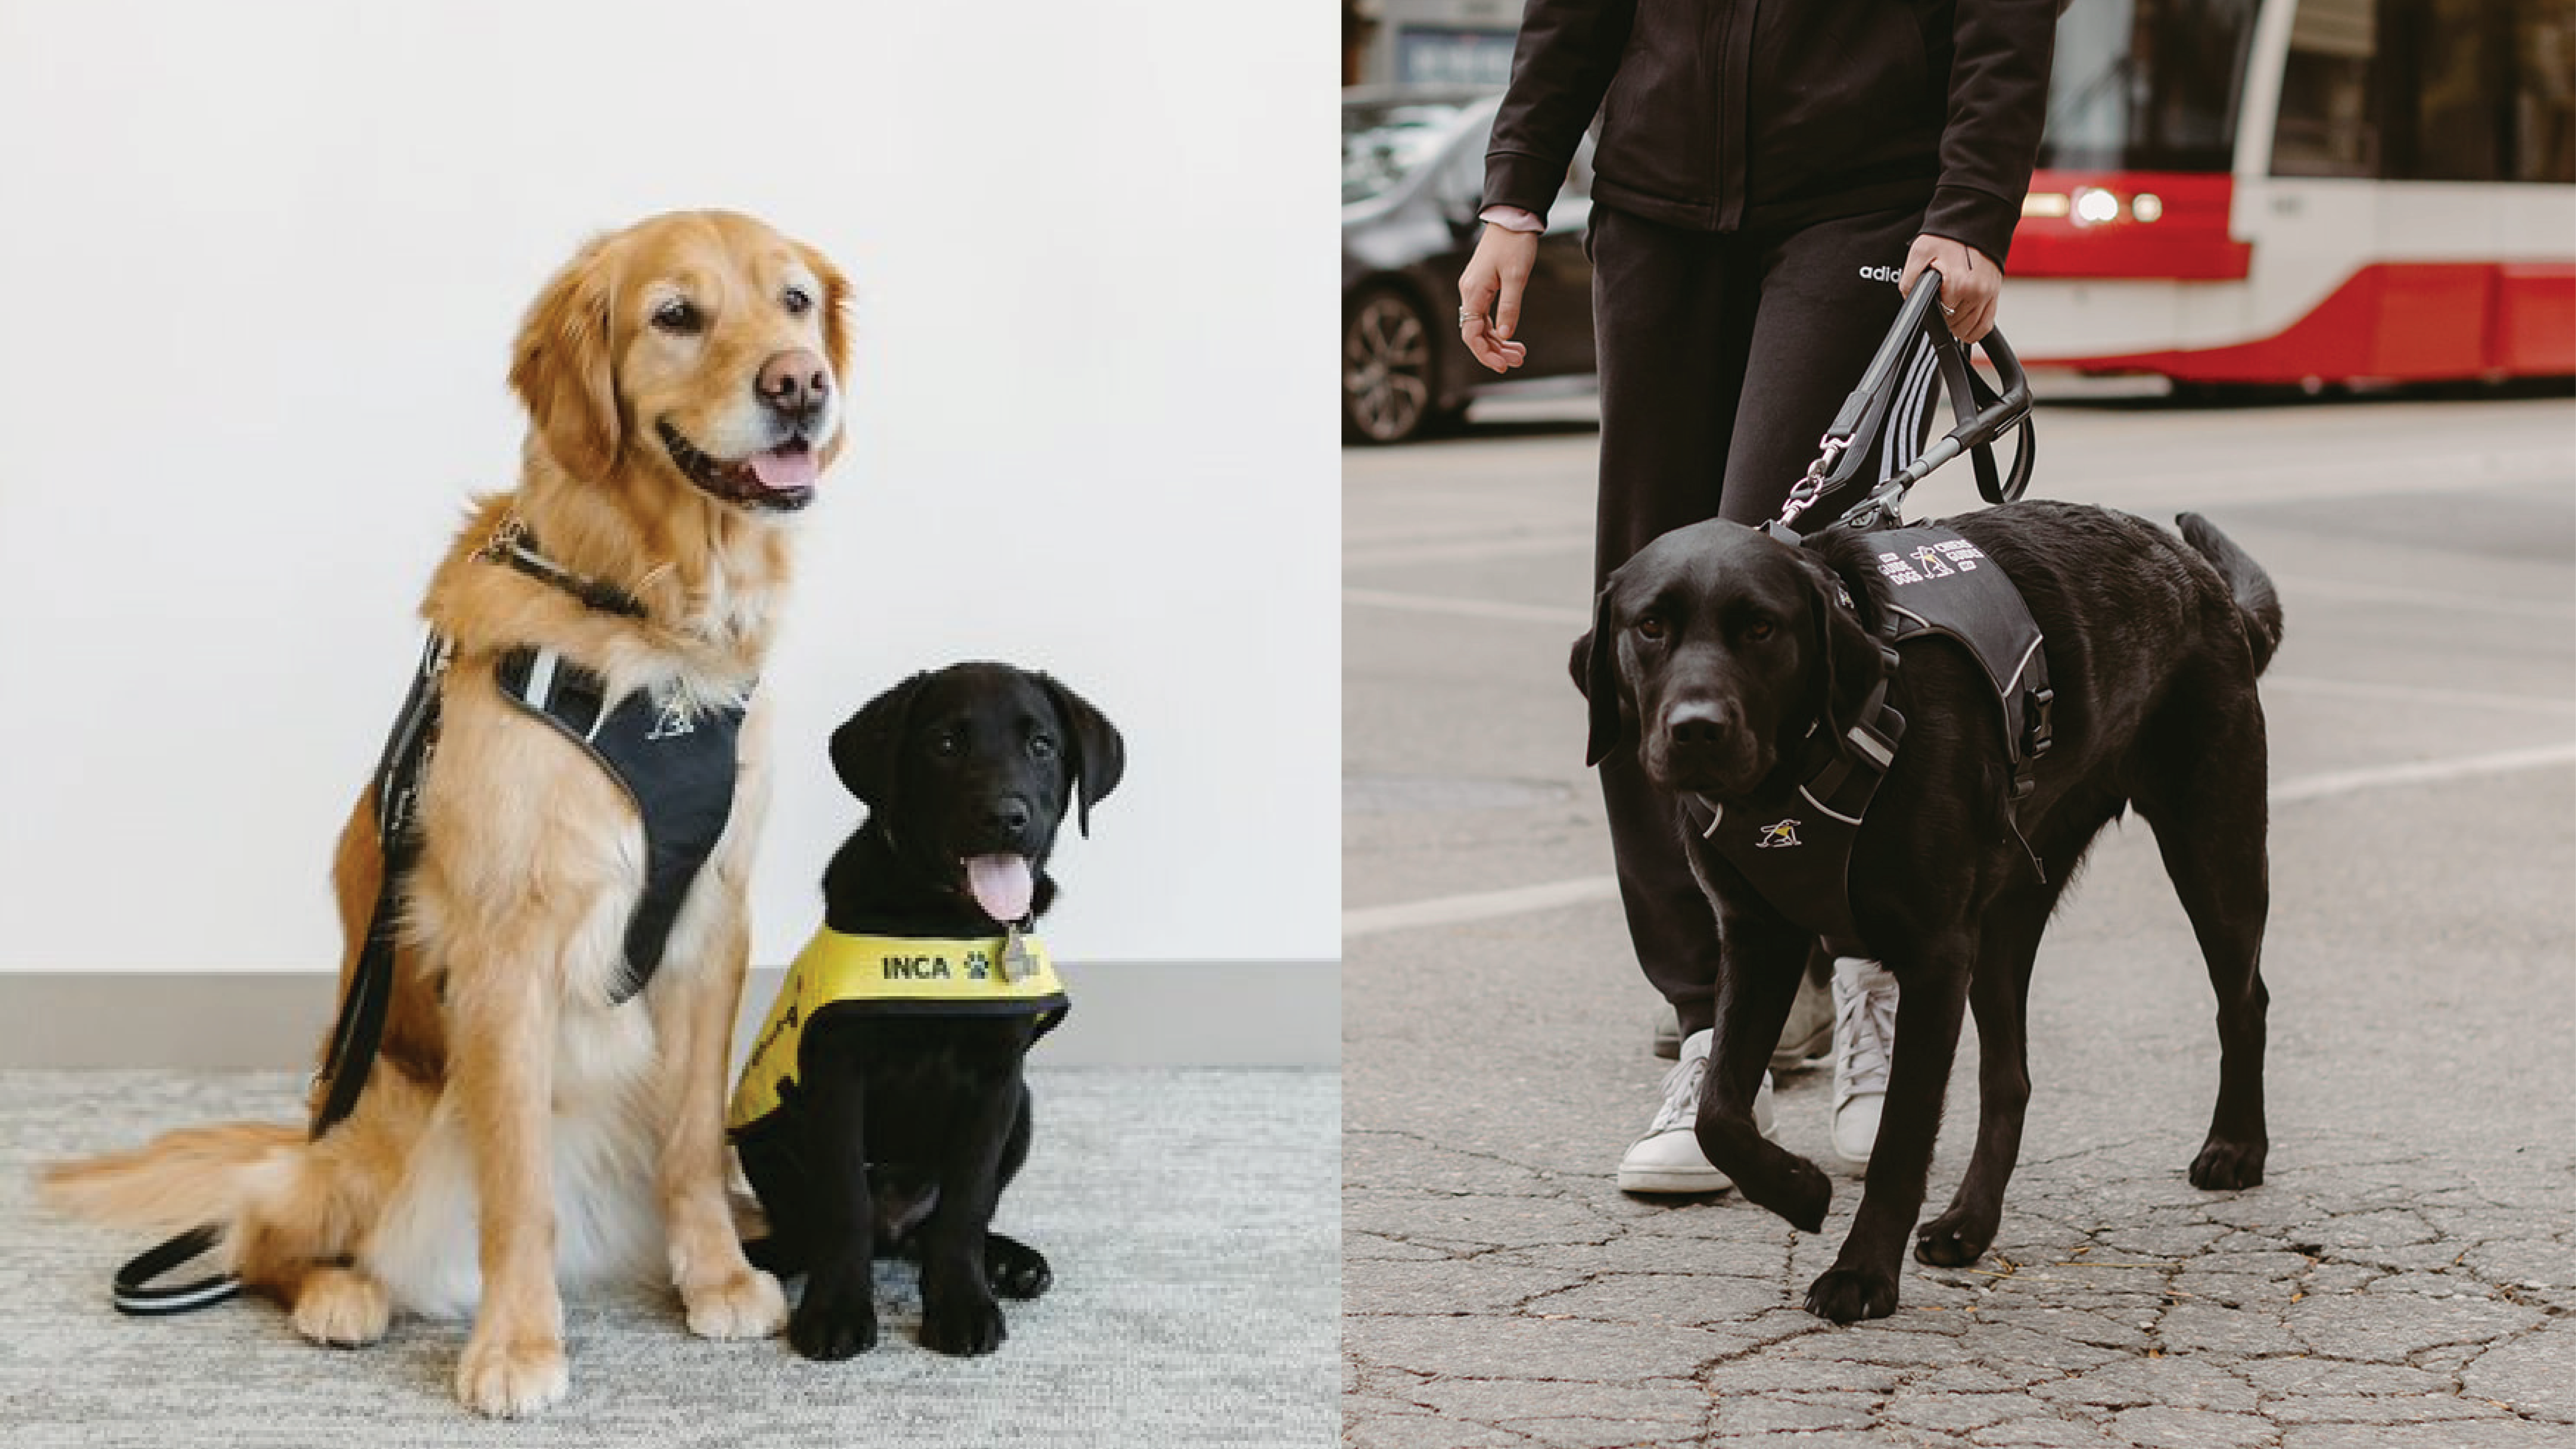 Two images. Left: A professional photoshoot. A yellow guide dog in harness sits next to a tiny black pup in training. Right: A guide dog hander crosses a busy downtown street with their black guide dog in harness. 